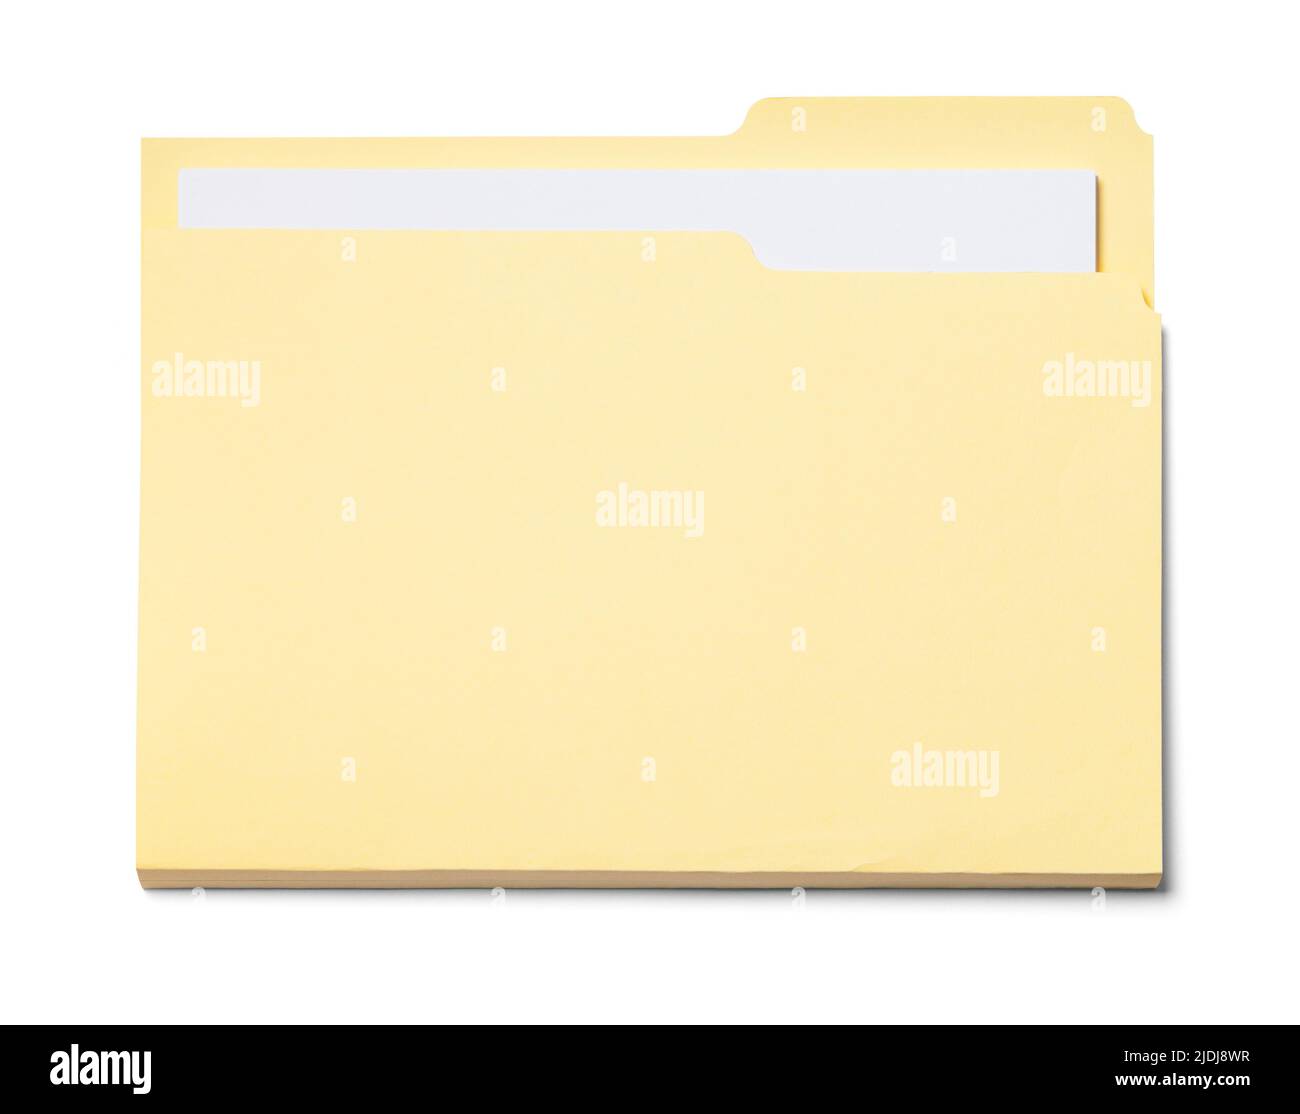 Yellow File Folder With Paper Cut Out on White. Stock Photo